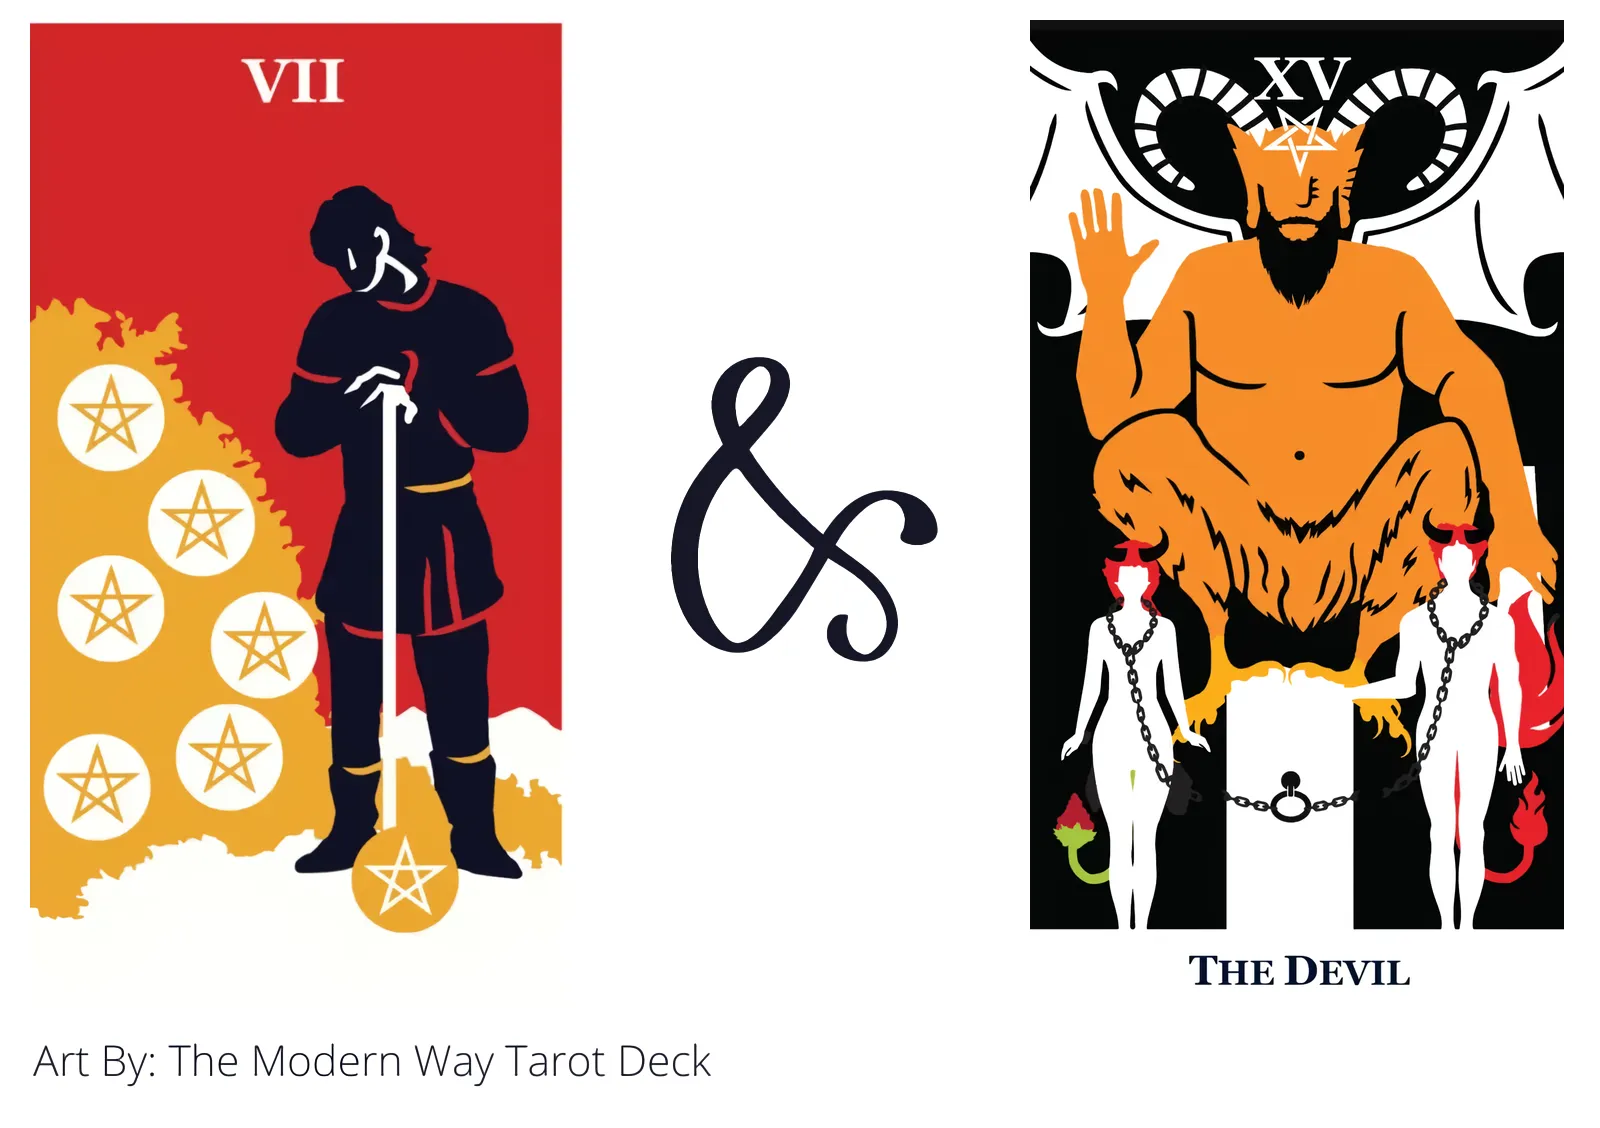 seven of pentacles and the devil tarot cards together